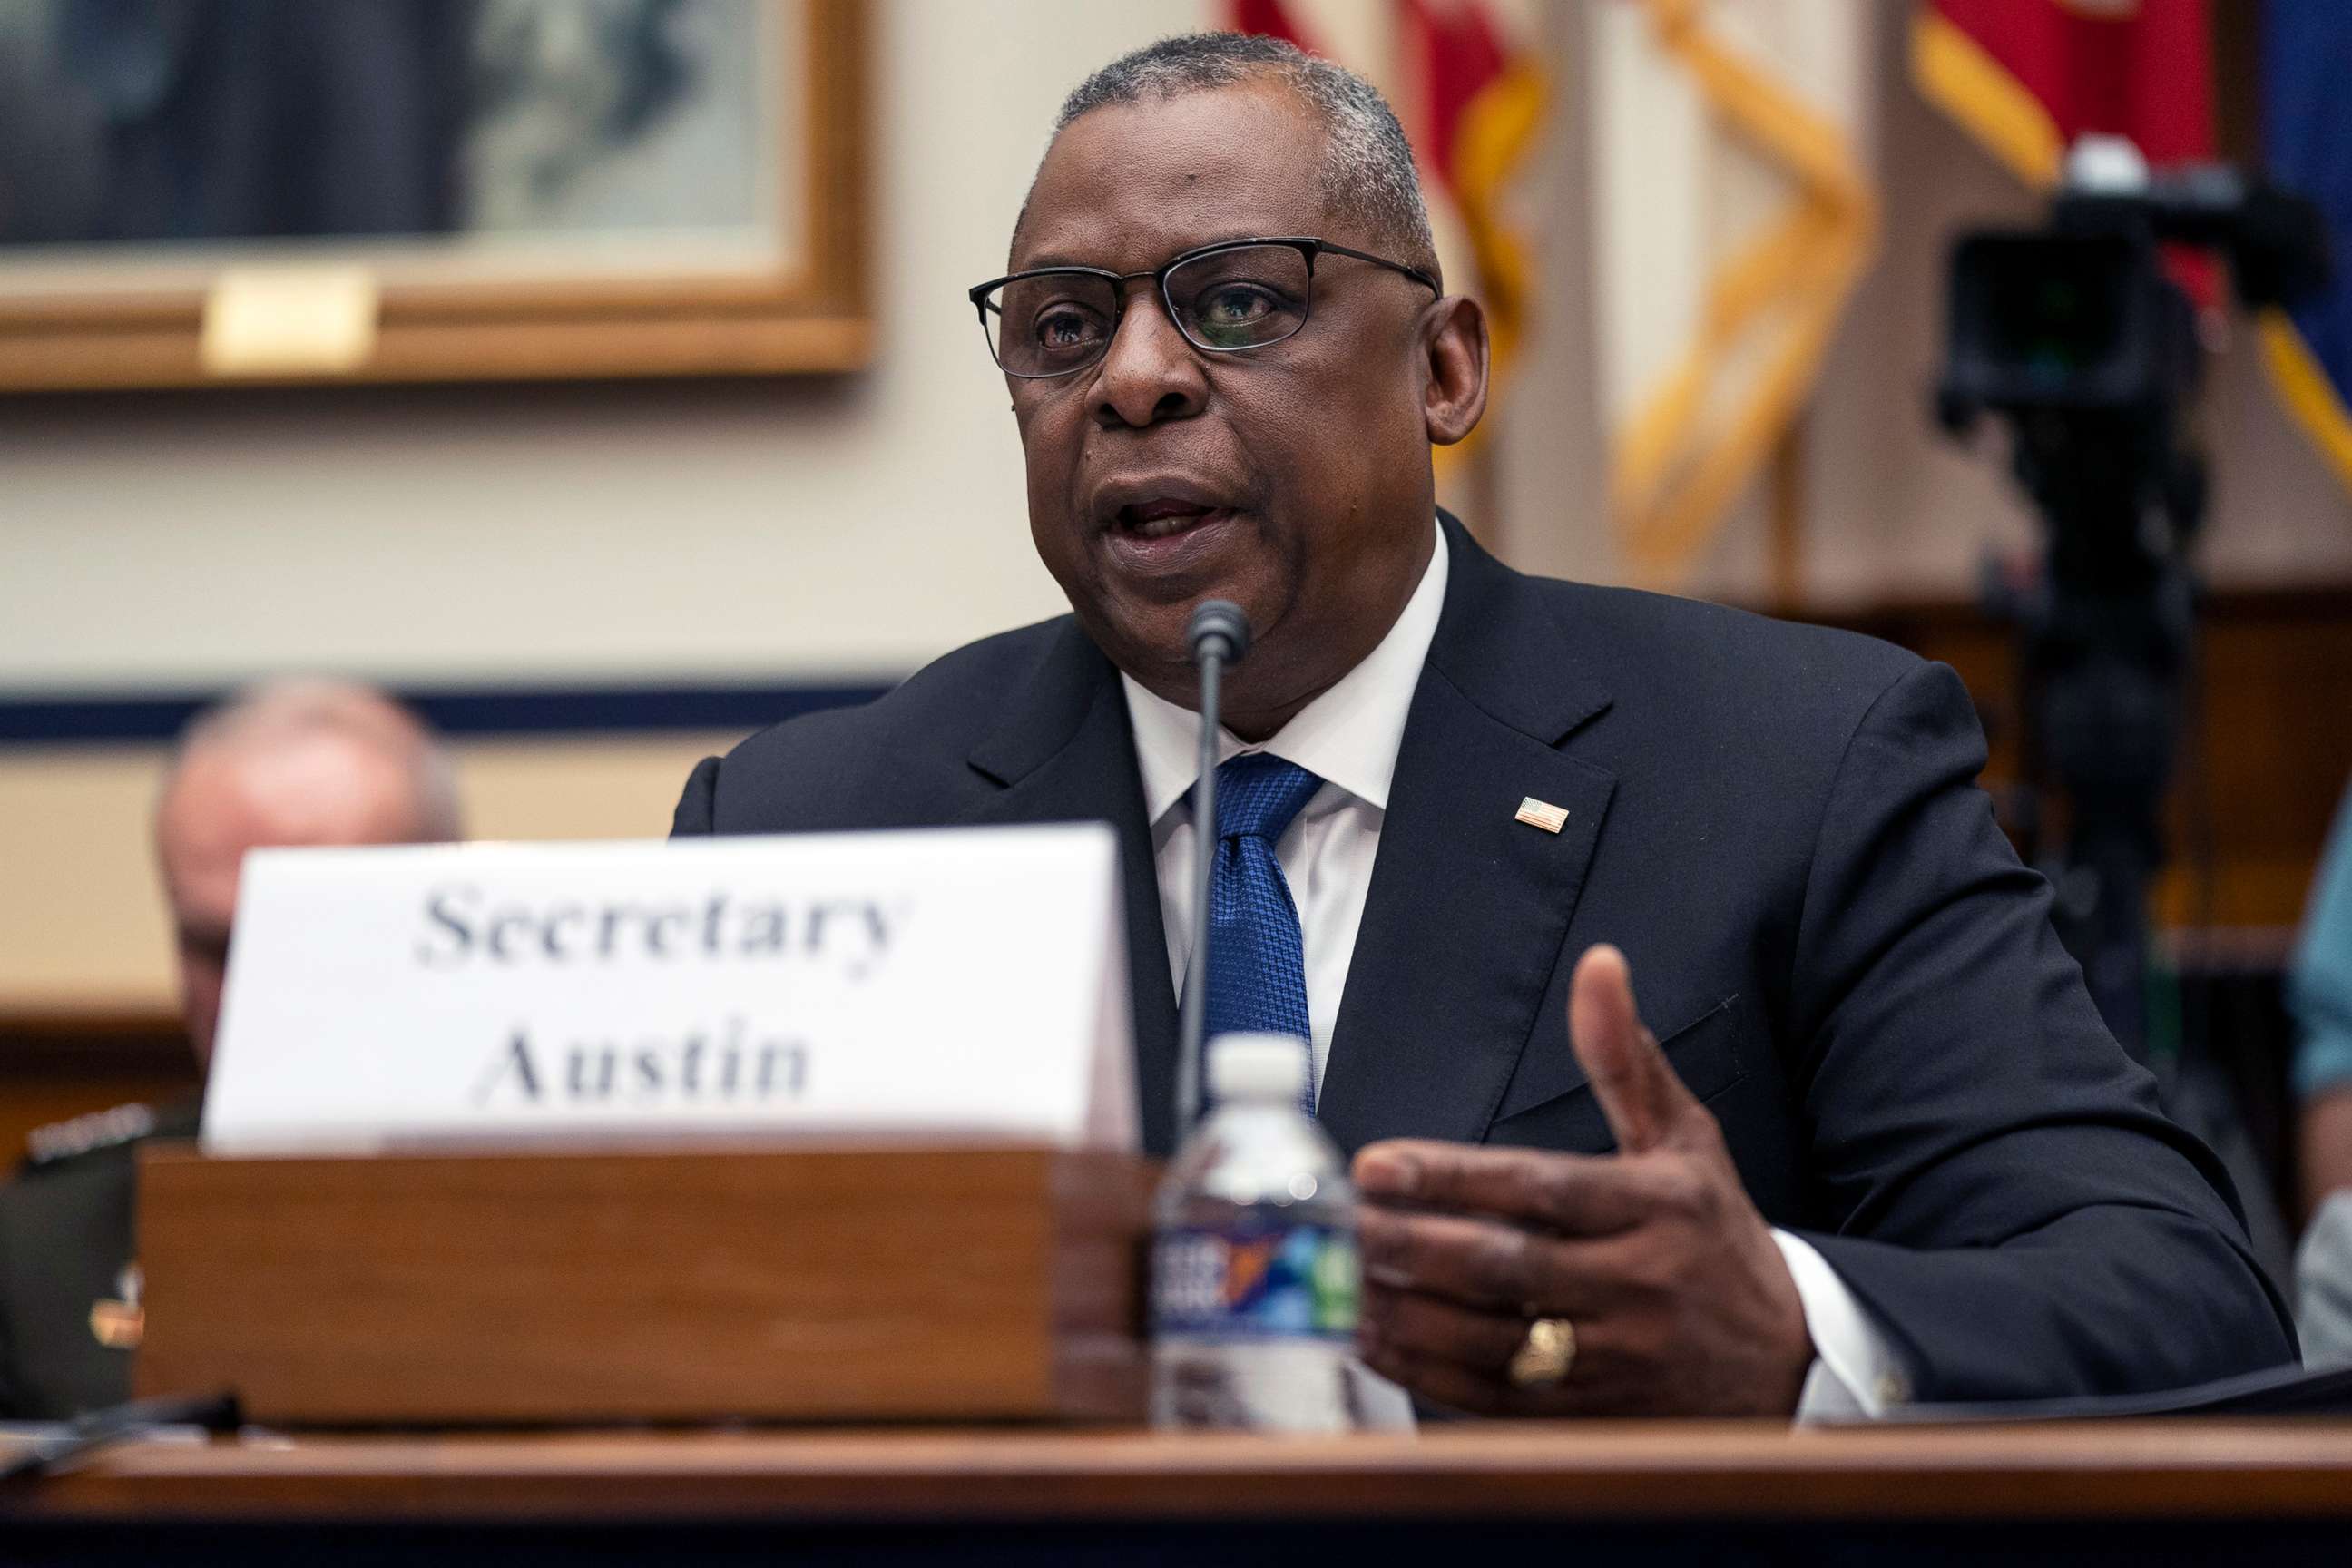 PHOTO: Secretary of Defense Lloyd Austin speaks during a House Armed Services Committee hearing on the fiscal year 2023 defense budget, April 5, 2022, in Washington, D.C.